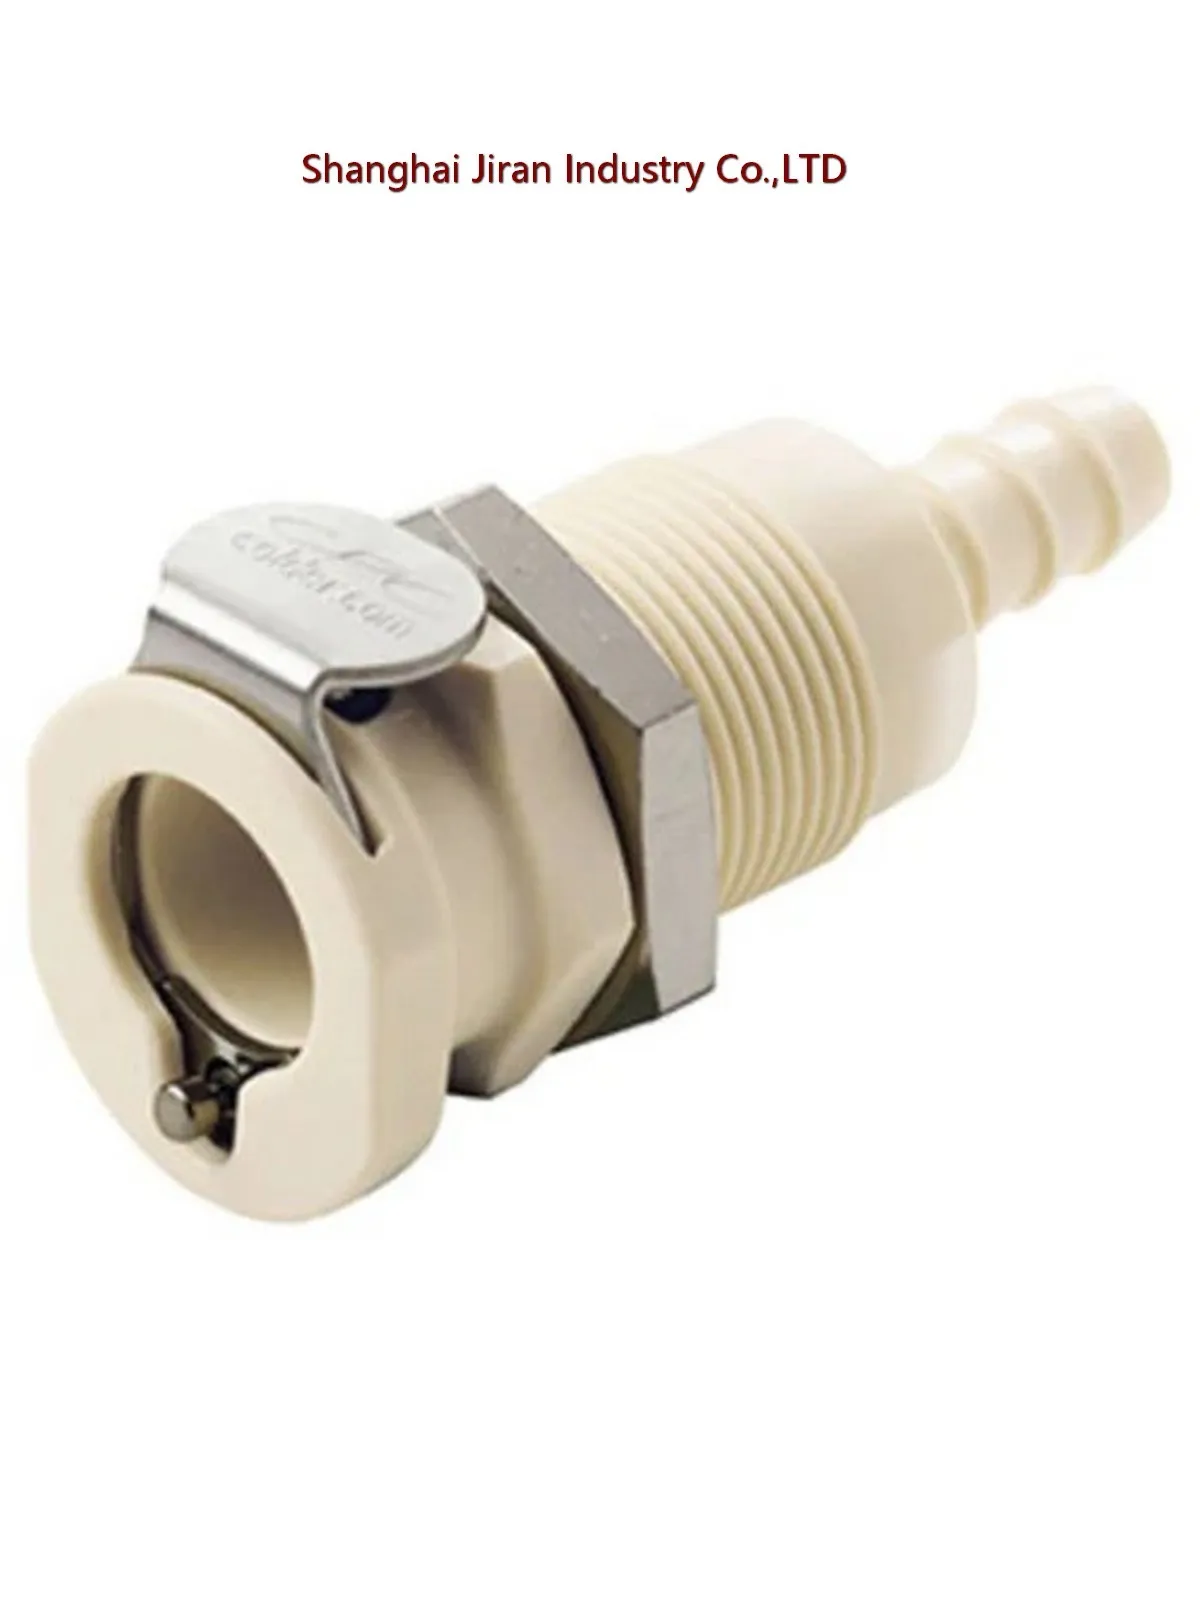 

CPC PLCD1600412 Valved Panel Mount Hose Barb Coupling Body 1/4 ID Barb